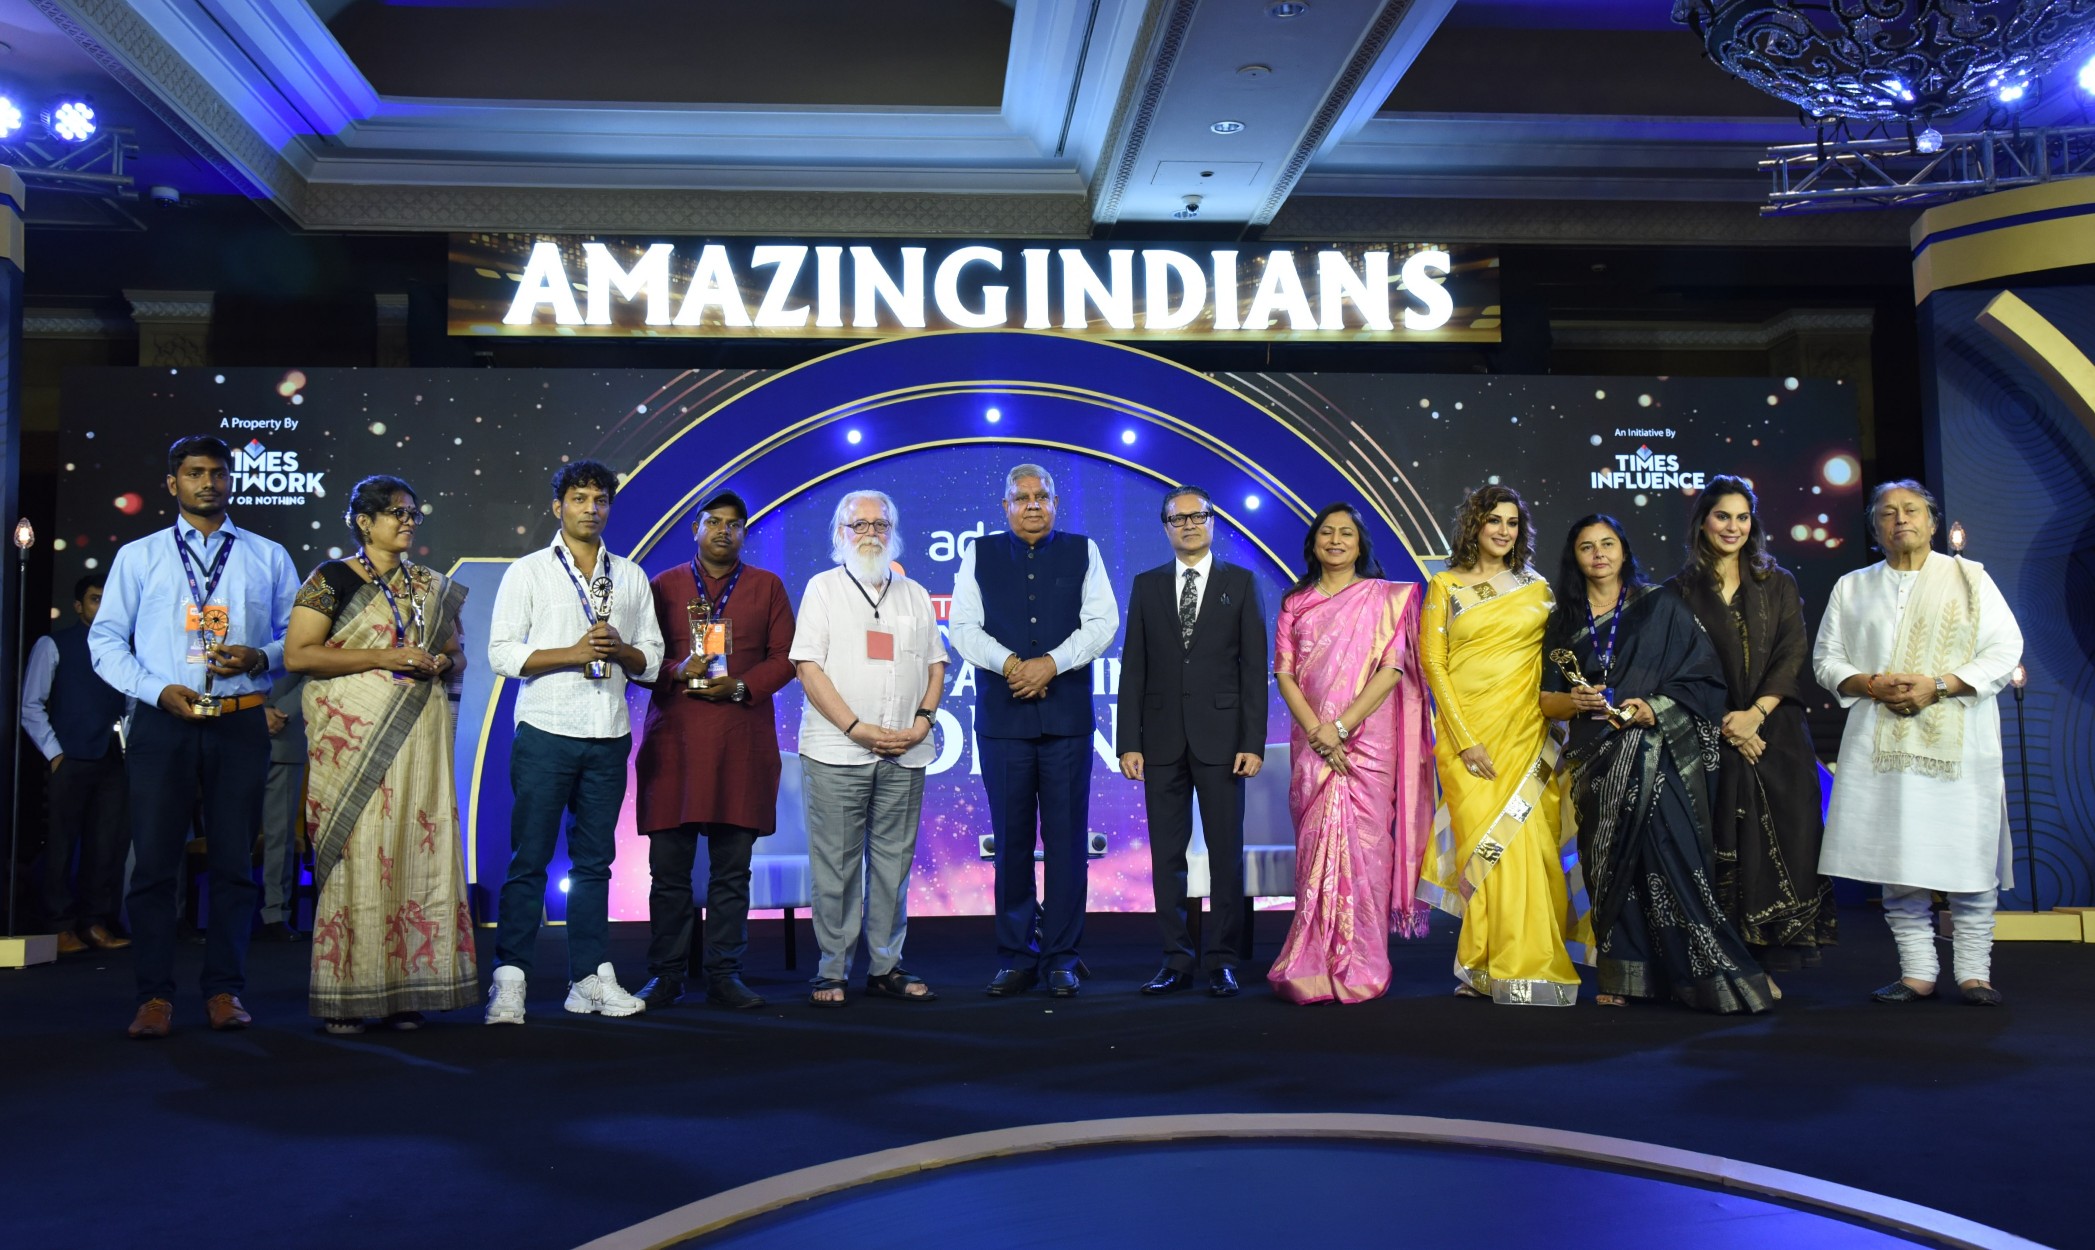 The Vice President, Shri Jagdeep Dhankhar at the Times Now Amazing Indians Awards 2022 ceremony in New Delhi on September 9, 2022.